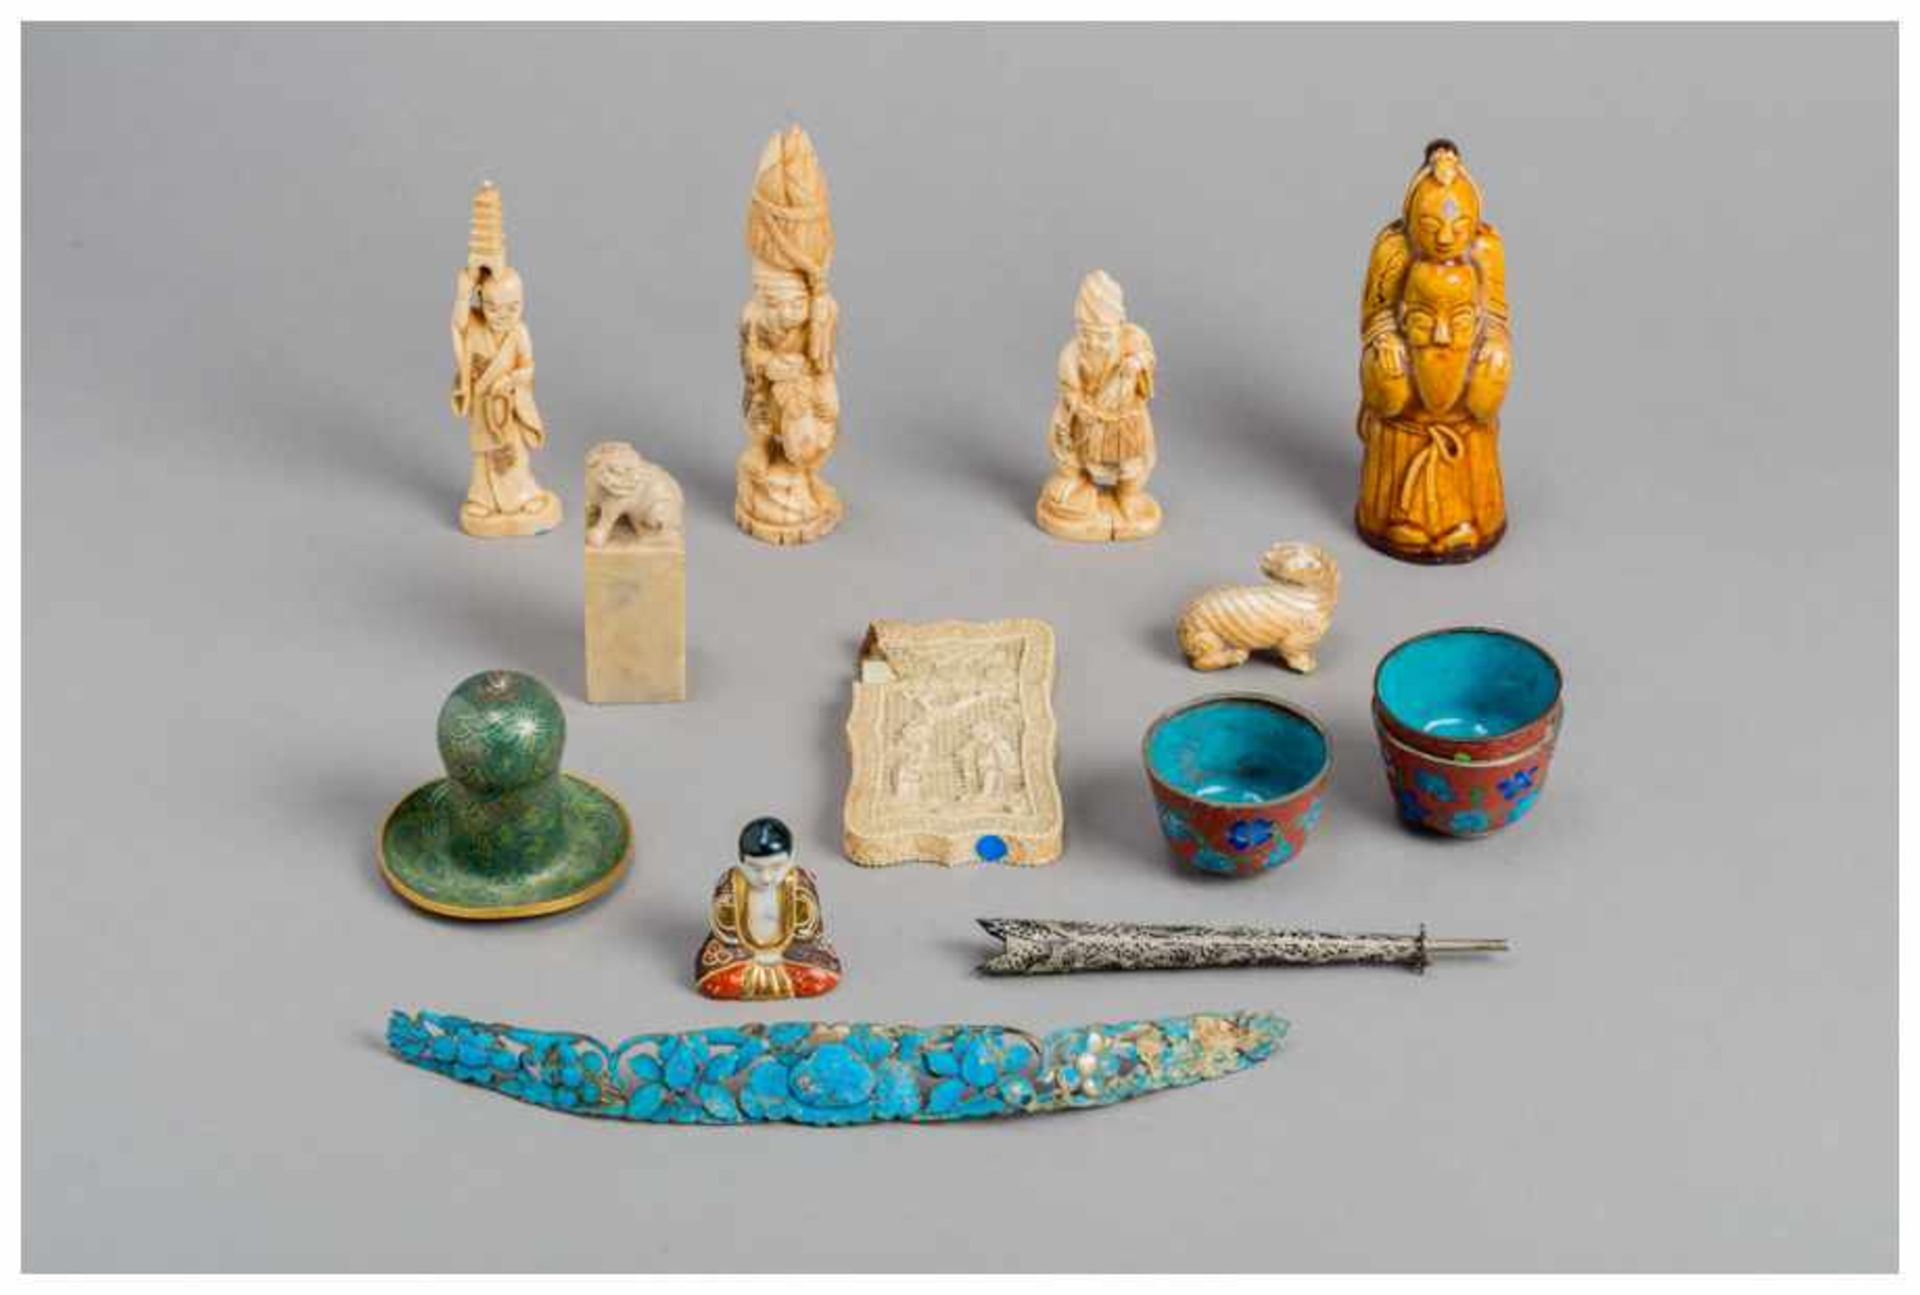 A MIXED LOT OF VARIOUS COLLECTIBLES Organic material, ceramic, soapstone, porcelain, metal. China